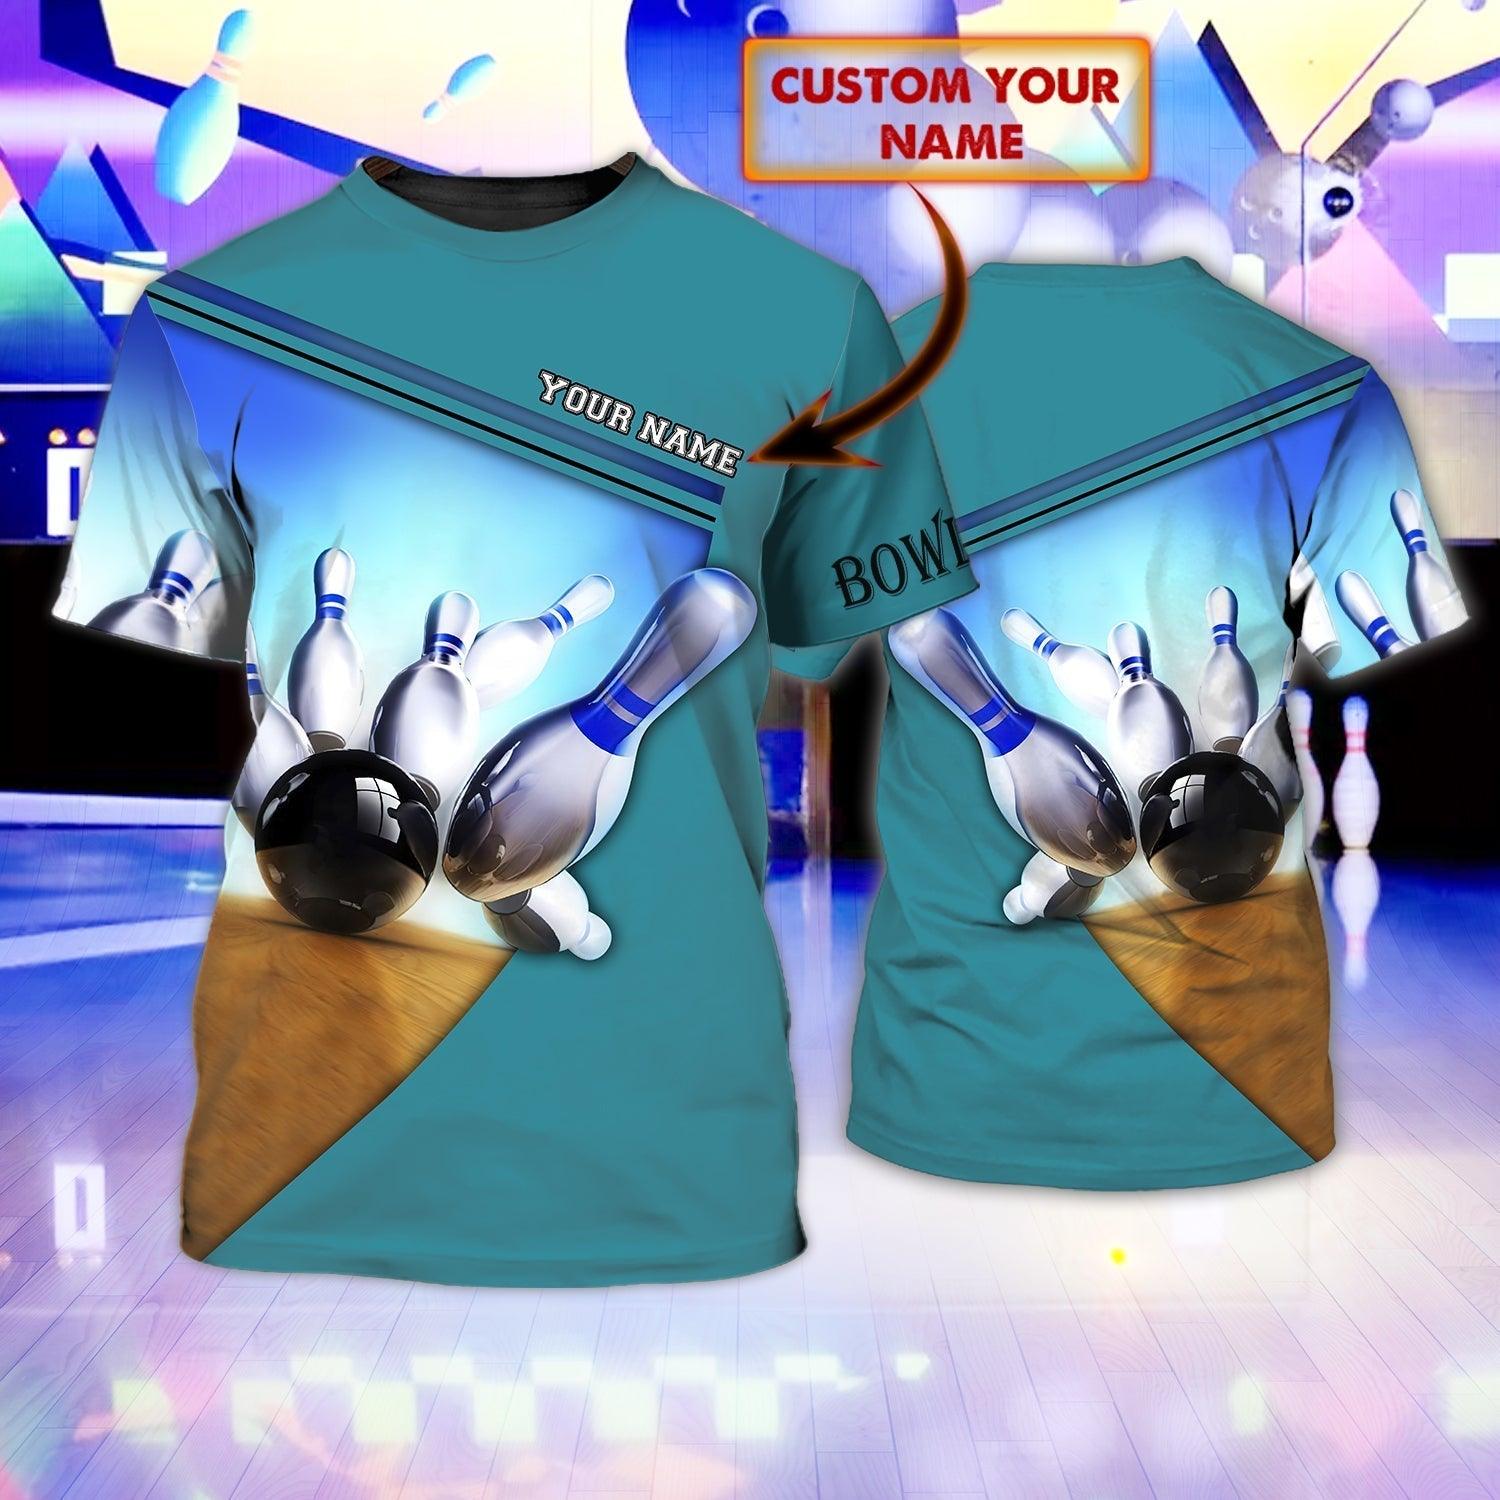 Customized Name 3D Bowling T Shirt, Personalized Bowling Shirt For Men, Bowling Team Players Shirt - Perfect Gift For Bowling Lovers, Bowlers - Amzanimalsgift